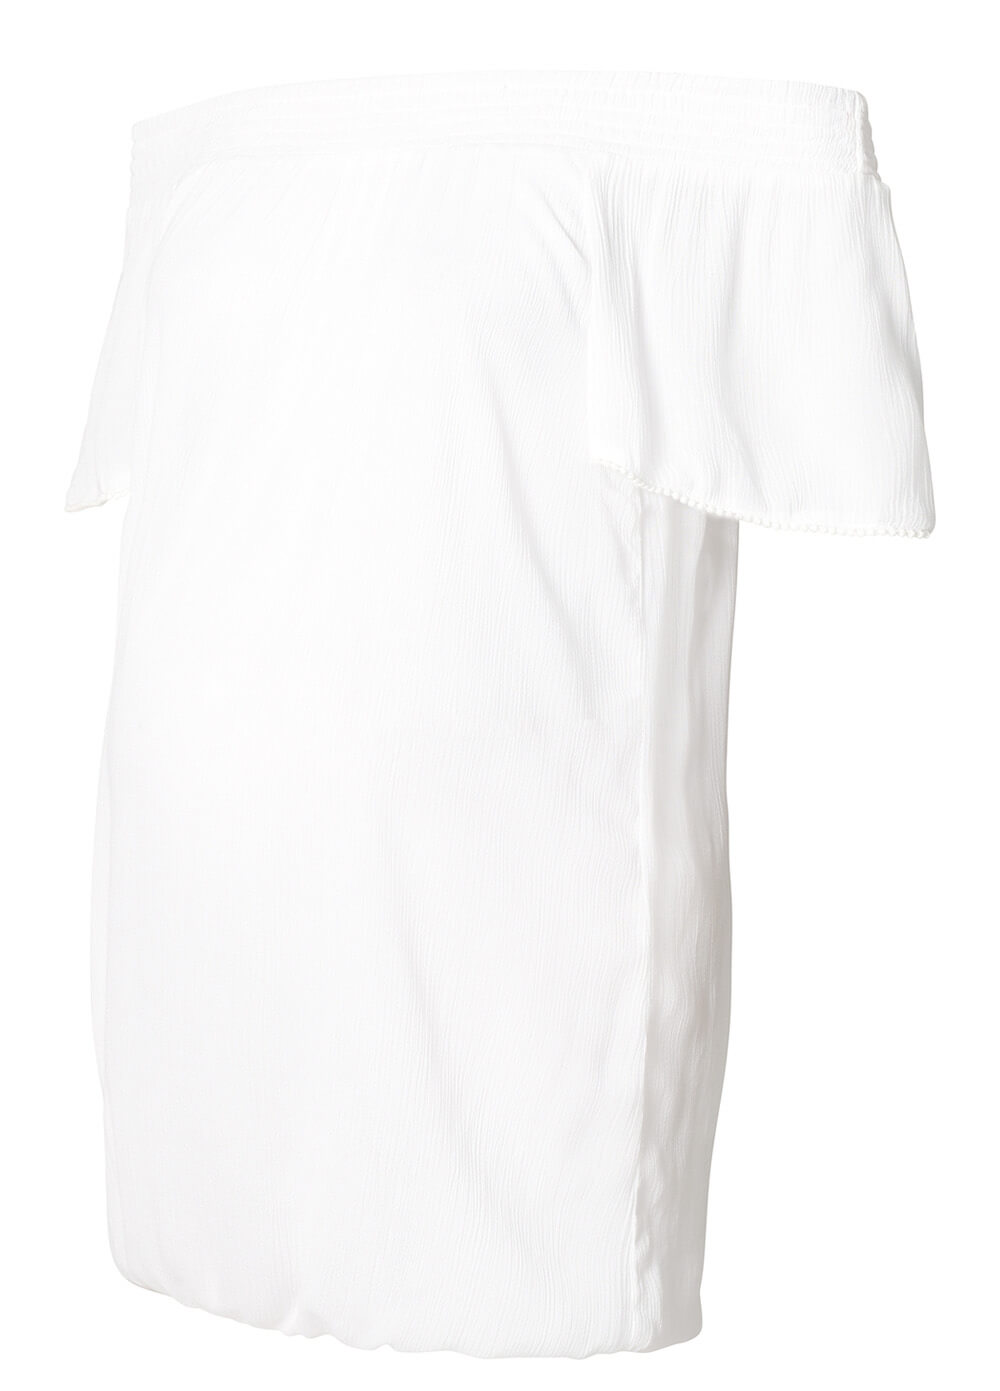 Off Shoulder Maternity Blouse in White by Esprit